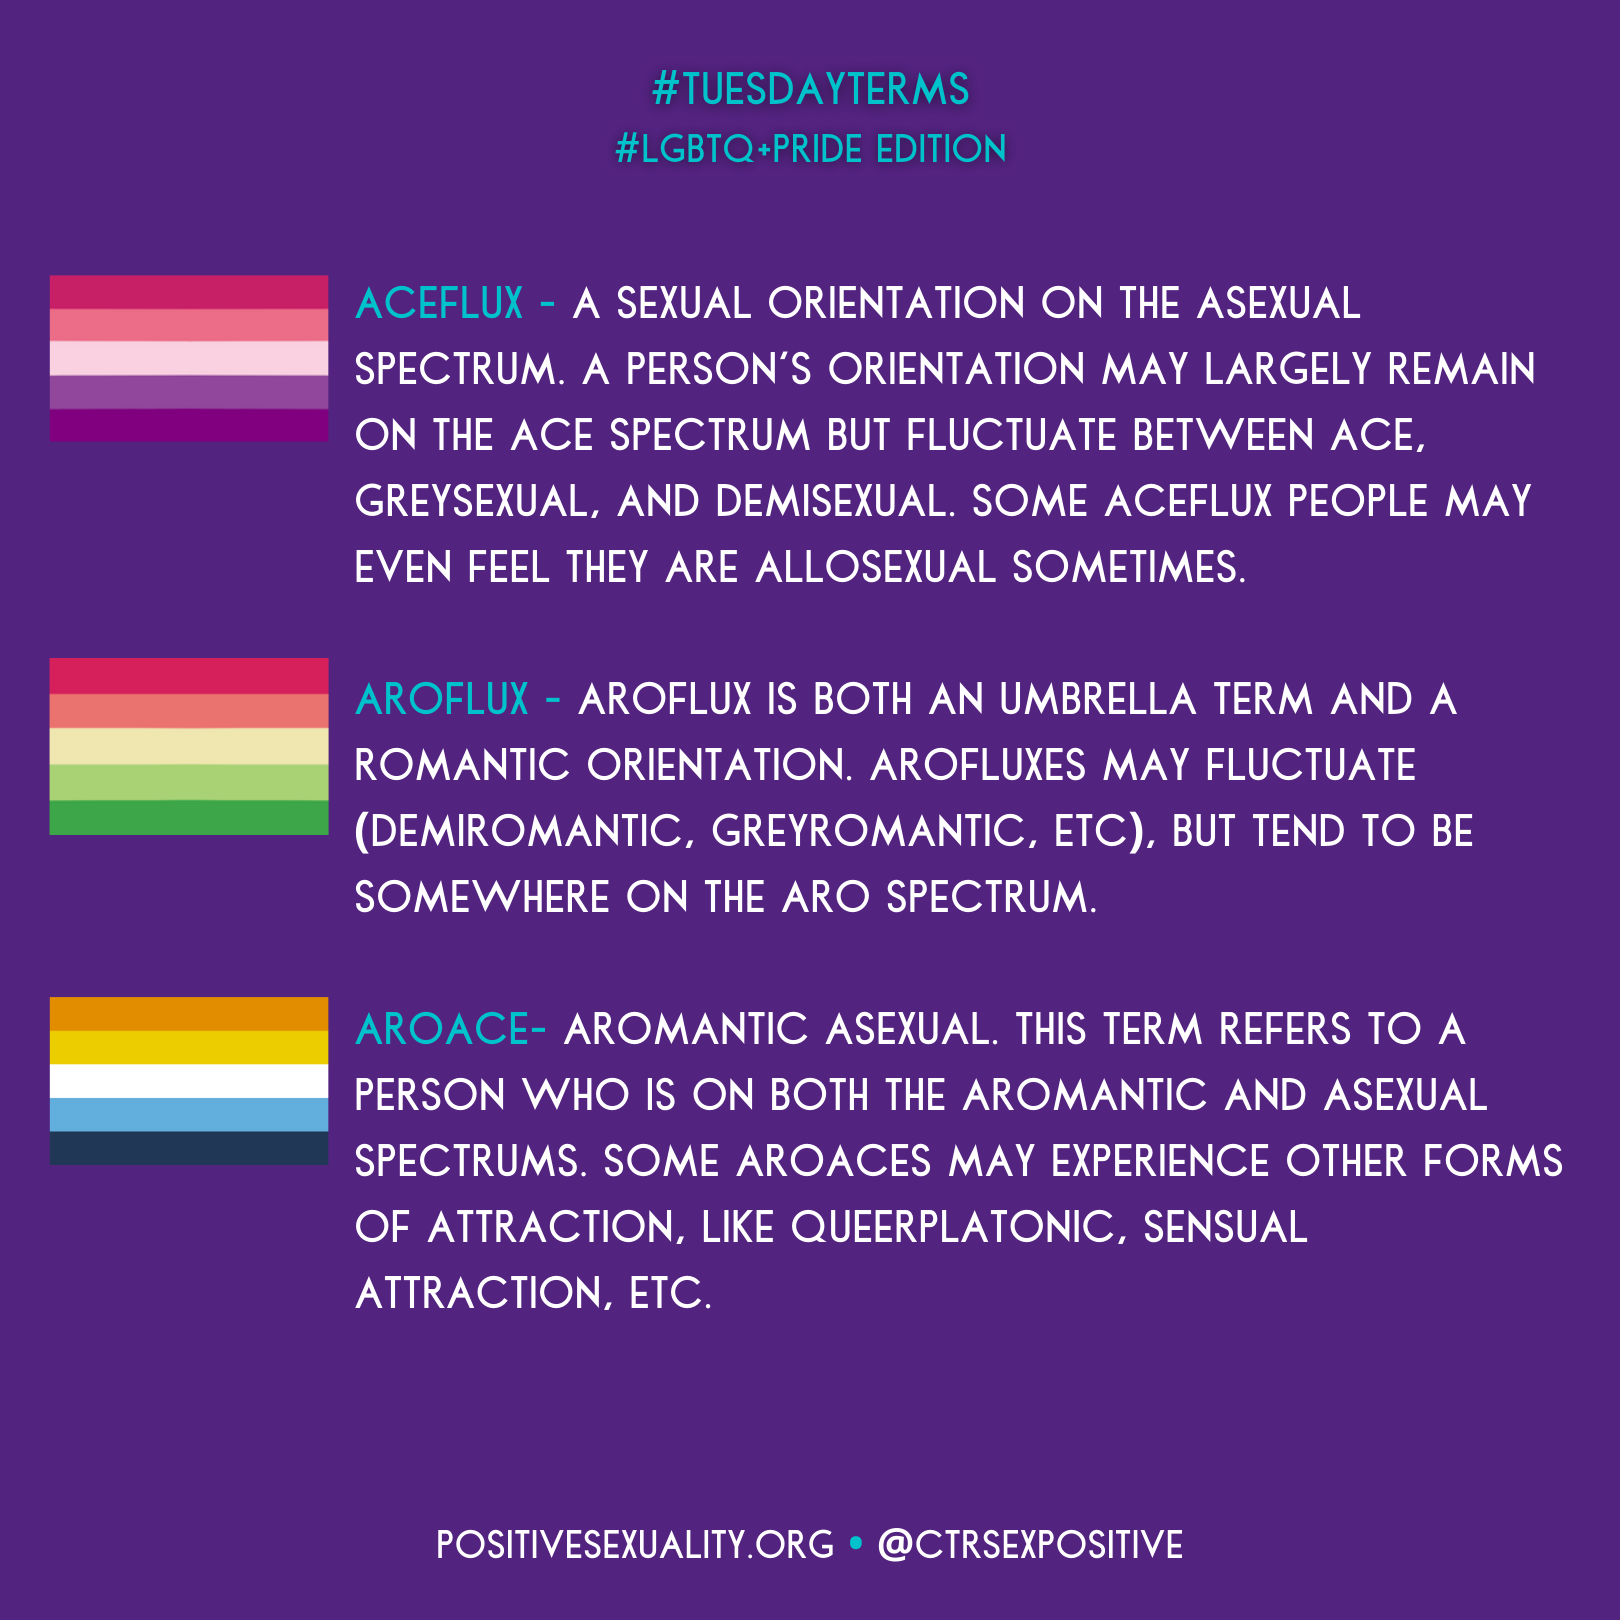 Is demisexual like asexual?